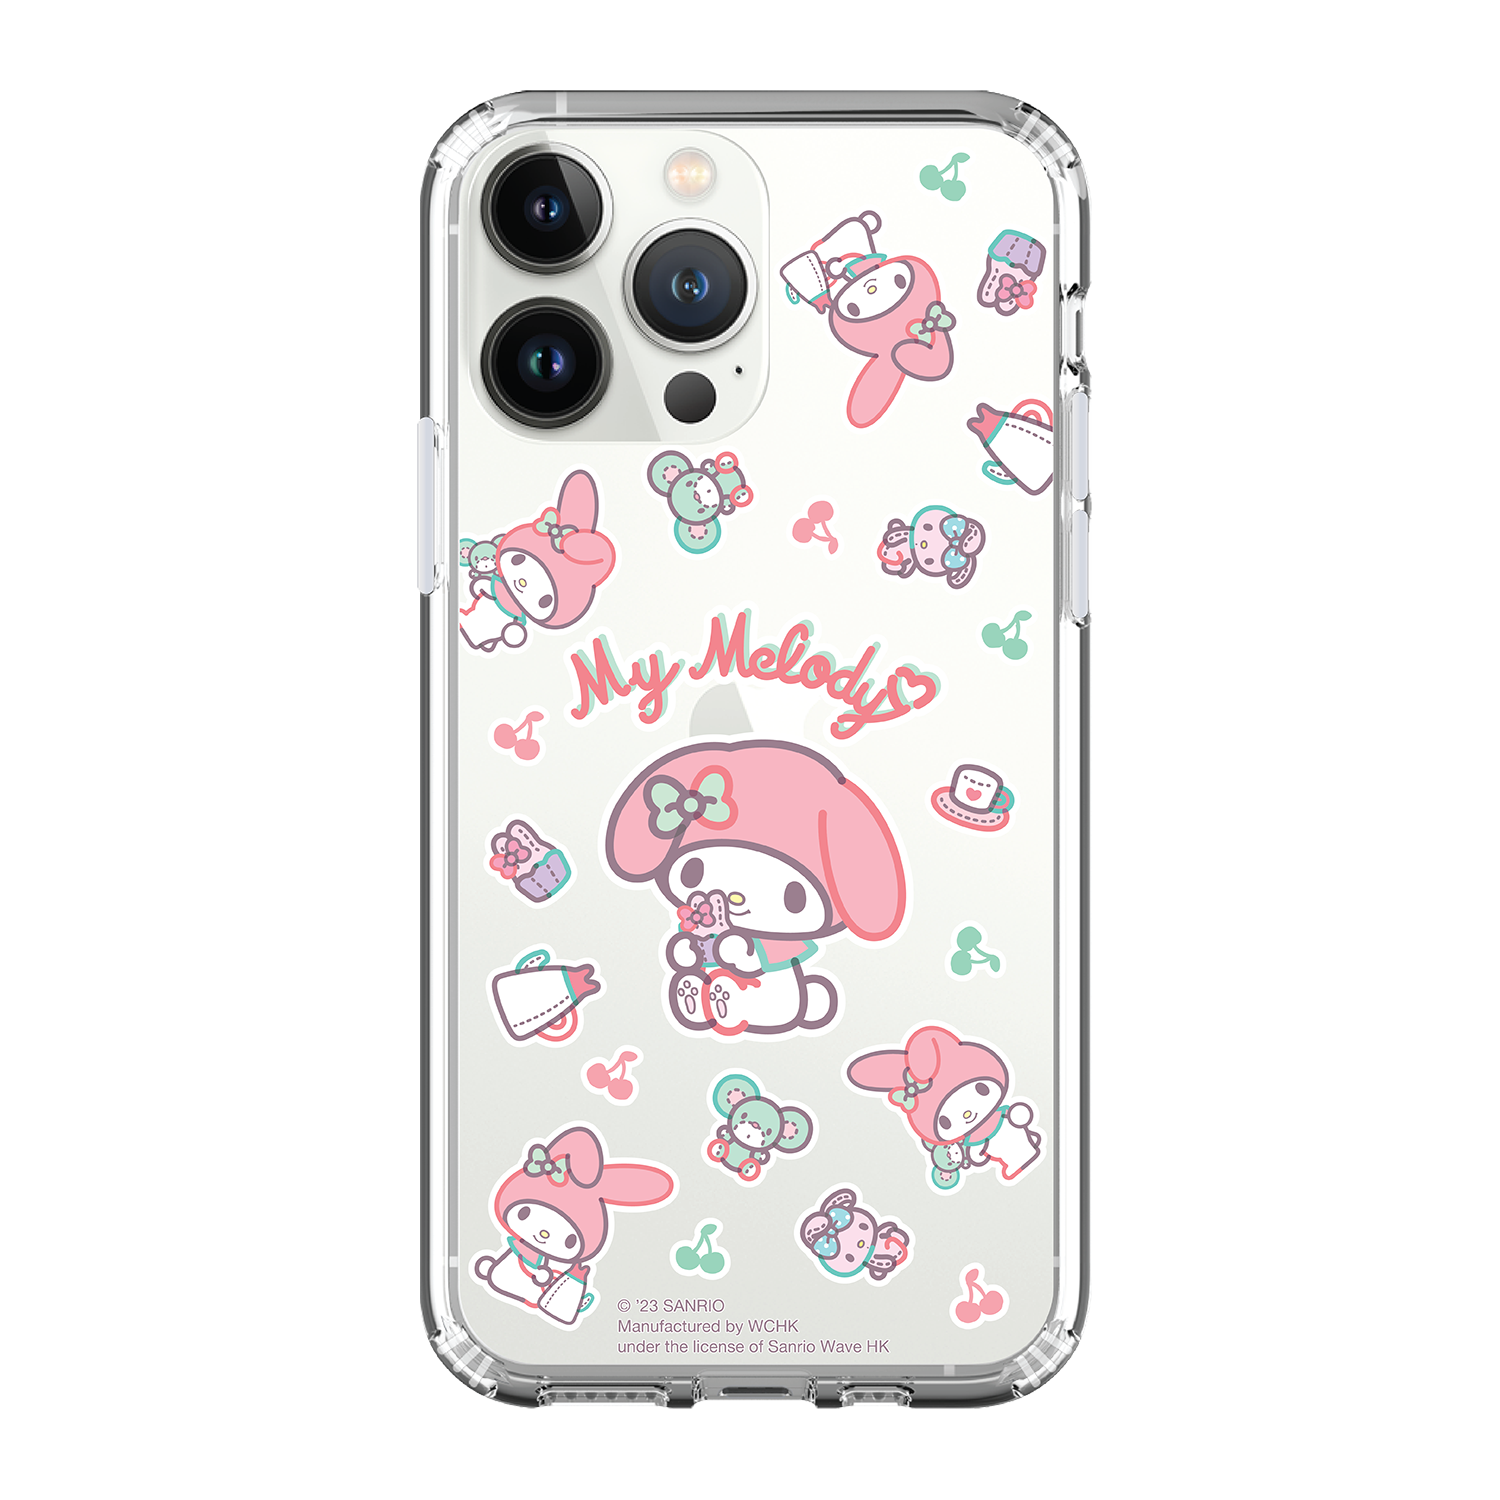 My Melody Clear Case / iPhone Case / Android Case / Samsung Case 防撞透明手機殼 (MM146)